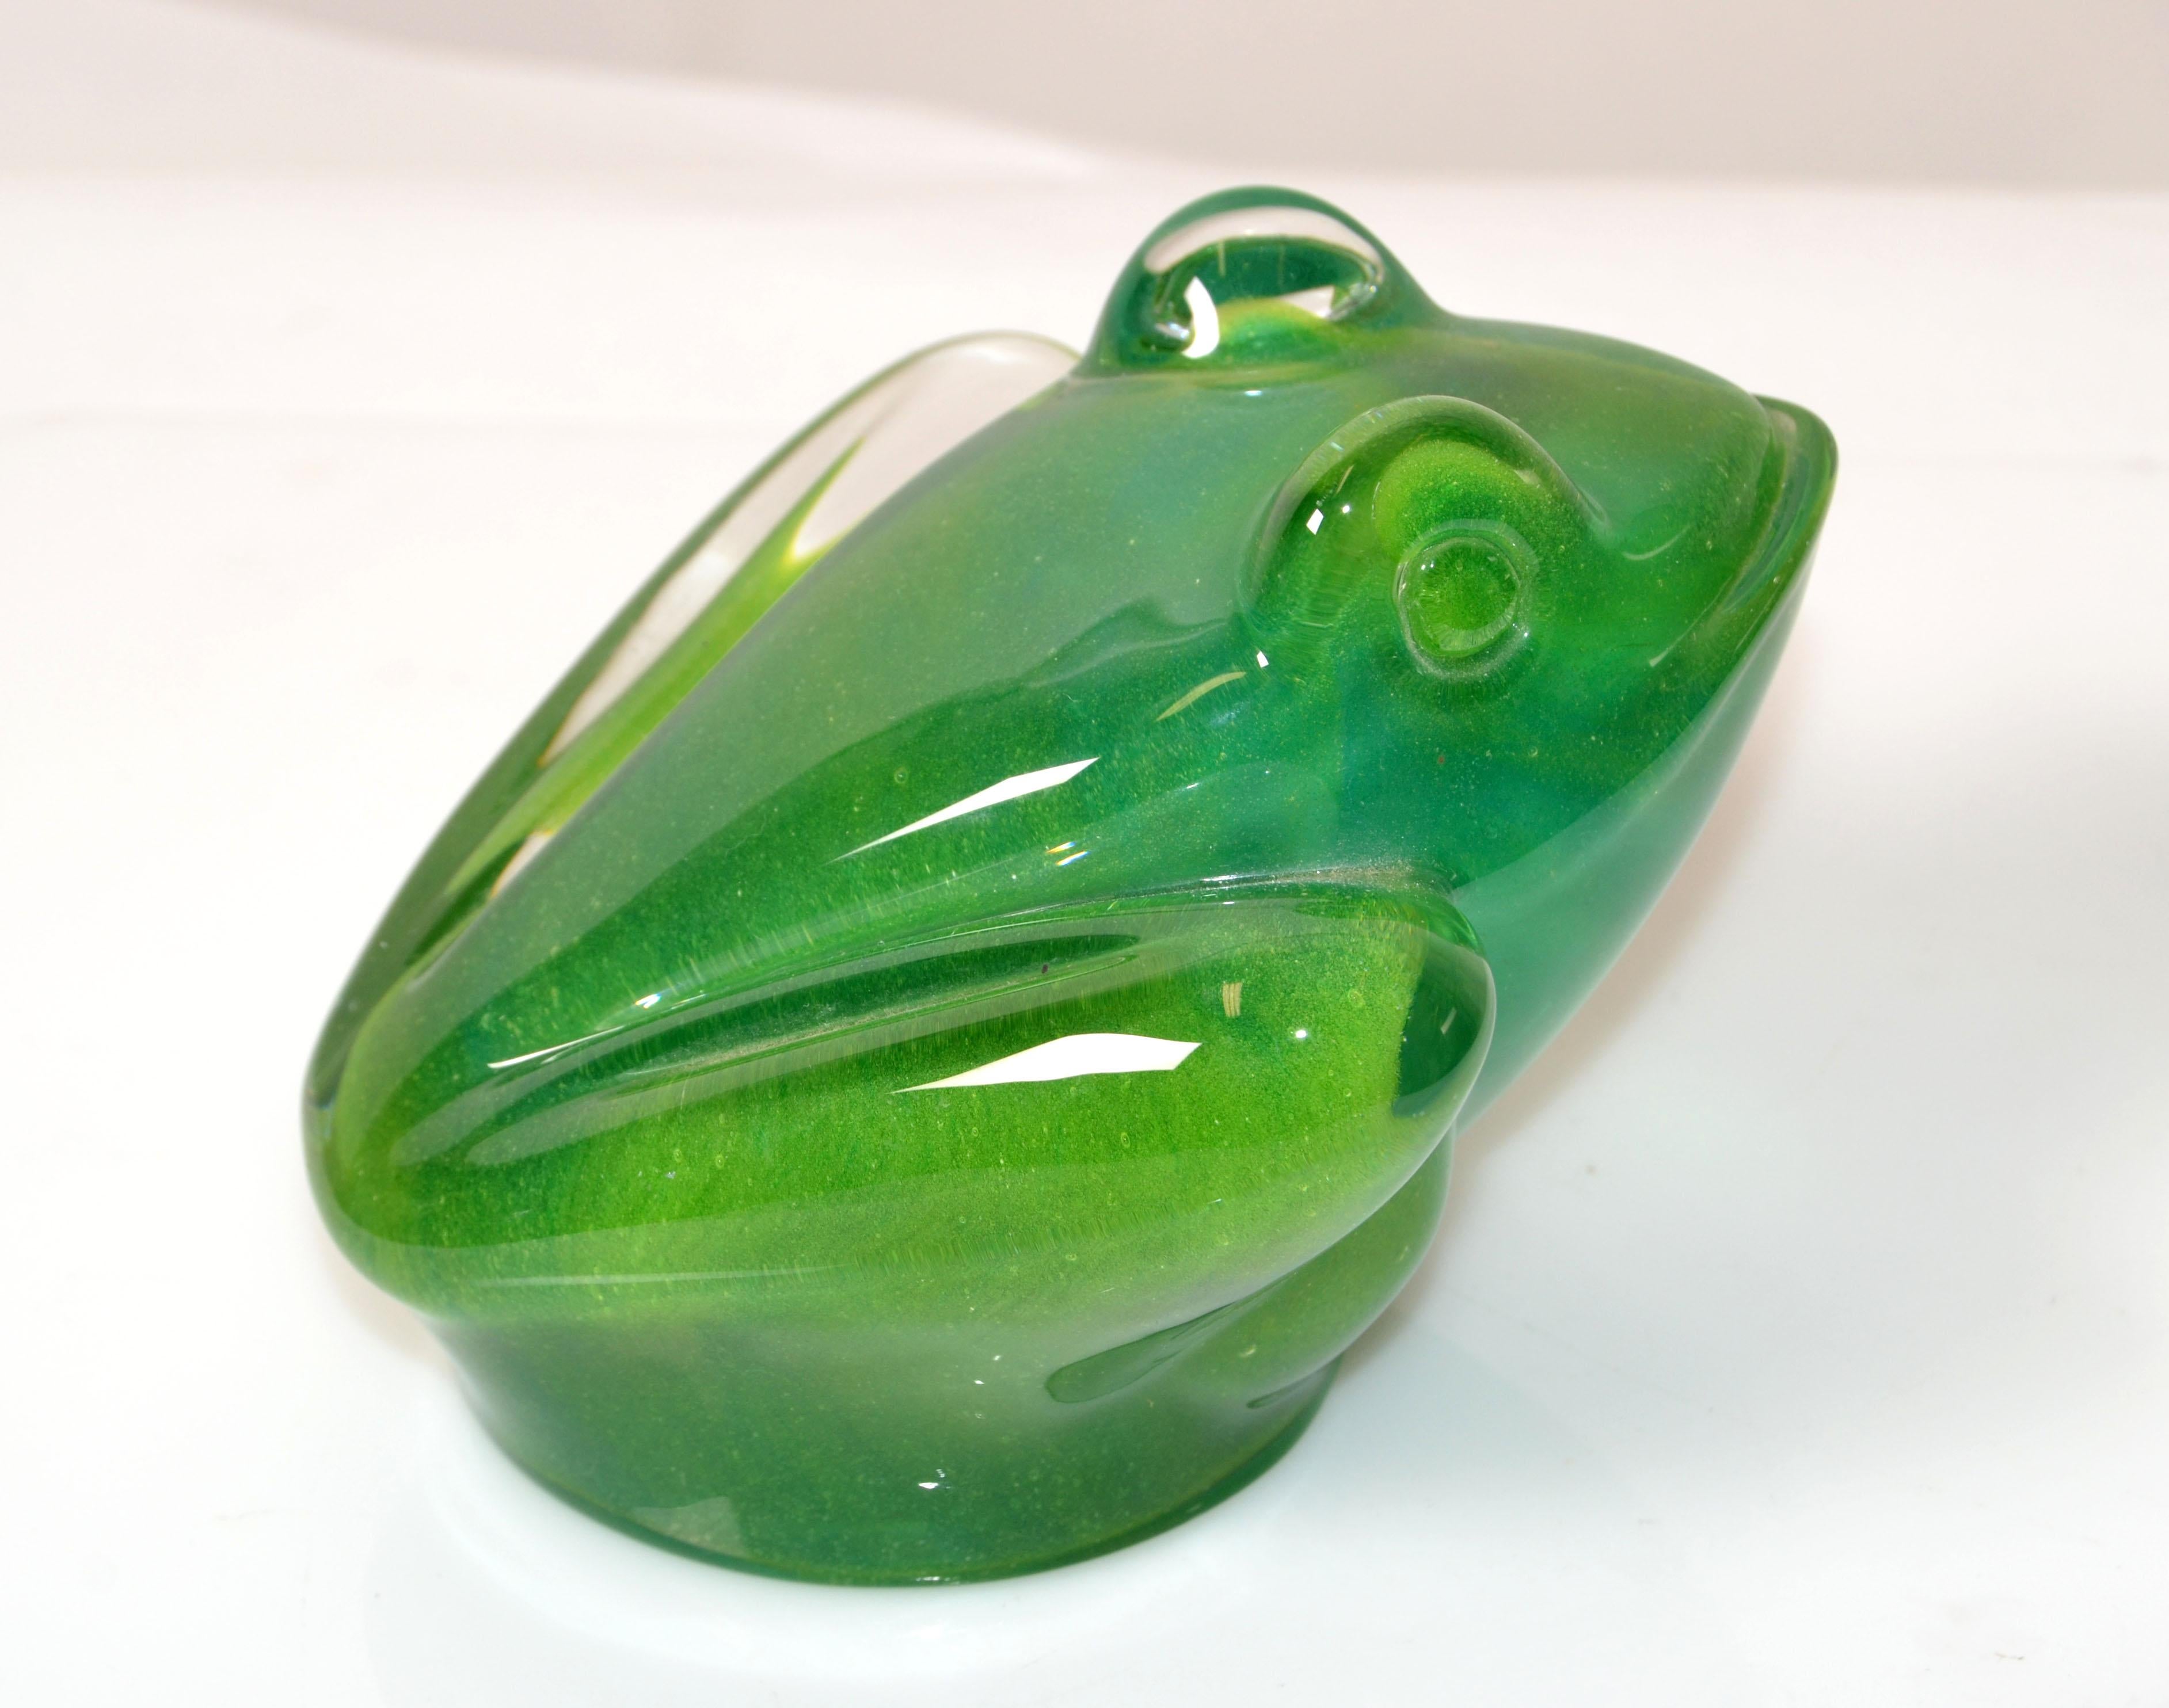 Green & Cased Clear abstract Murano glass Frog made in Italy, Mid-Century Modern.
Made with the Massello Technique, developed by Flavio Poli in the 1920s, using one solid block of glass.
Produced in Murano. 
 